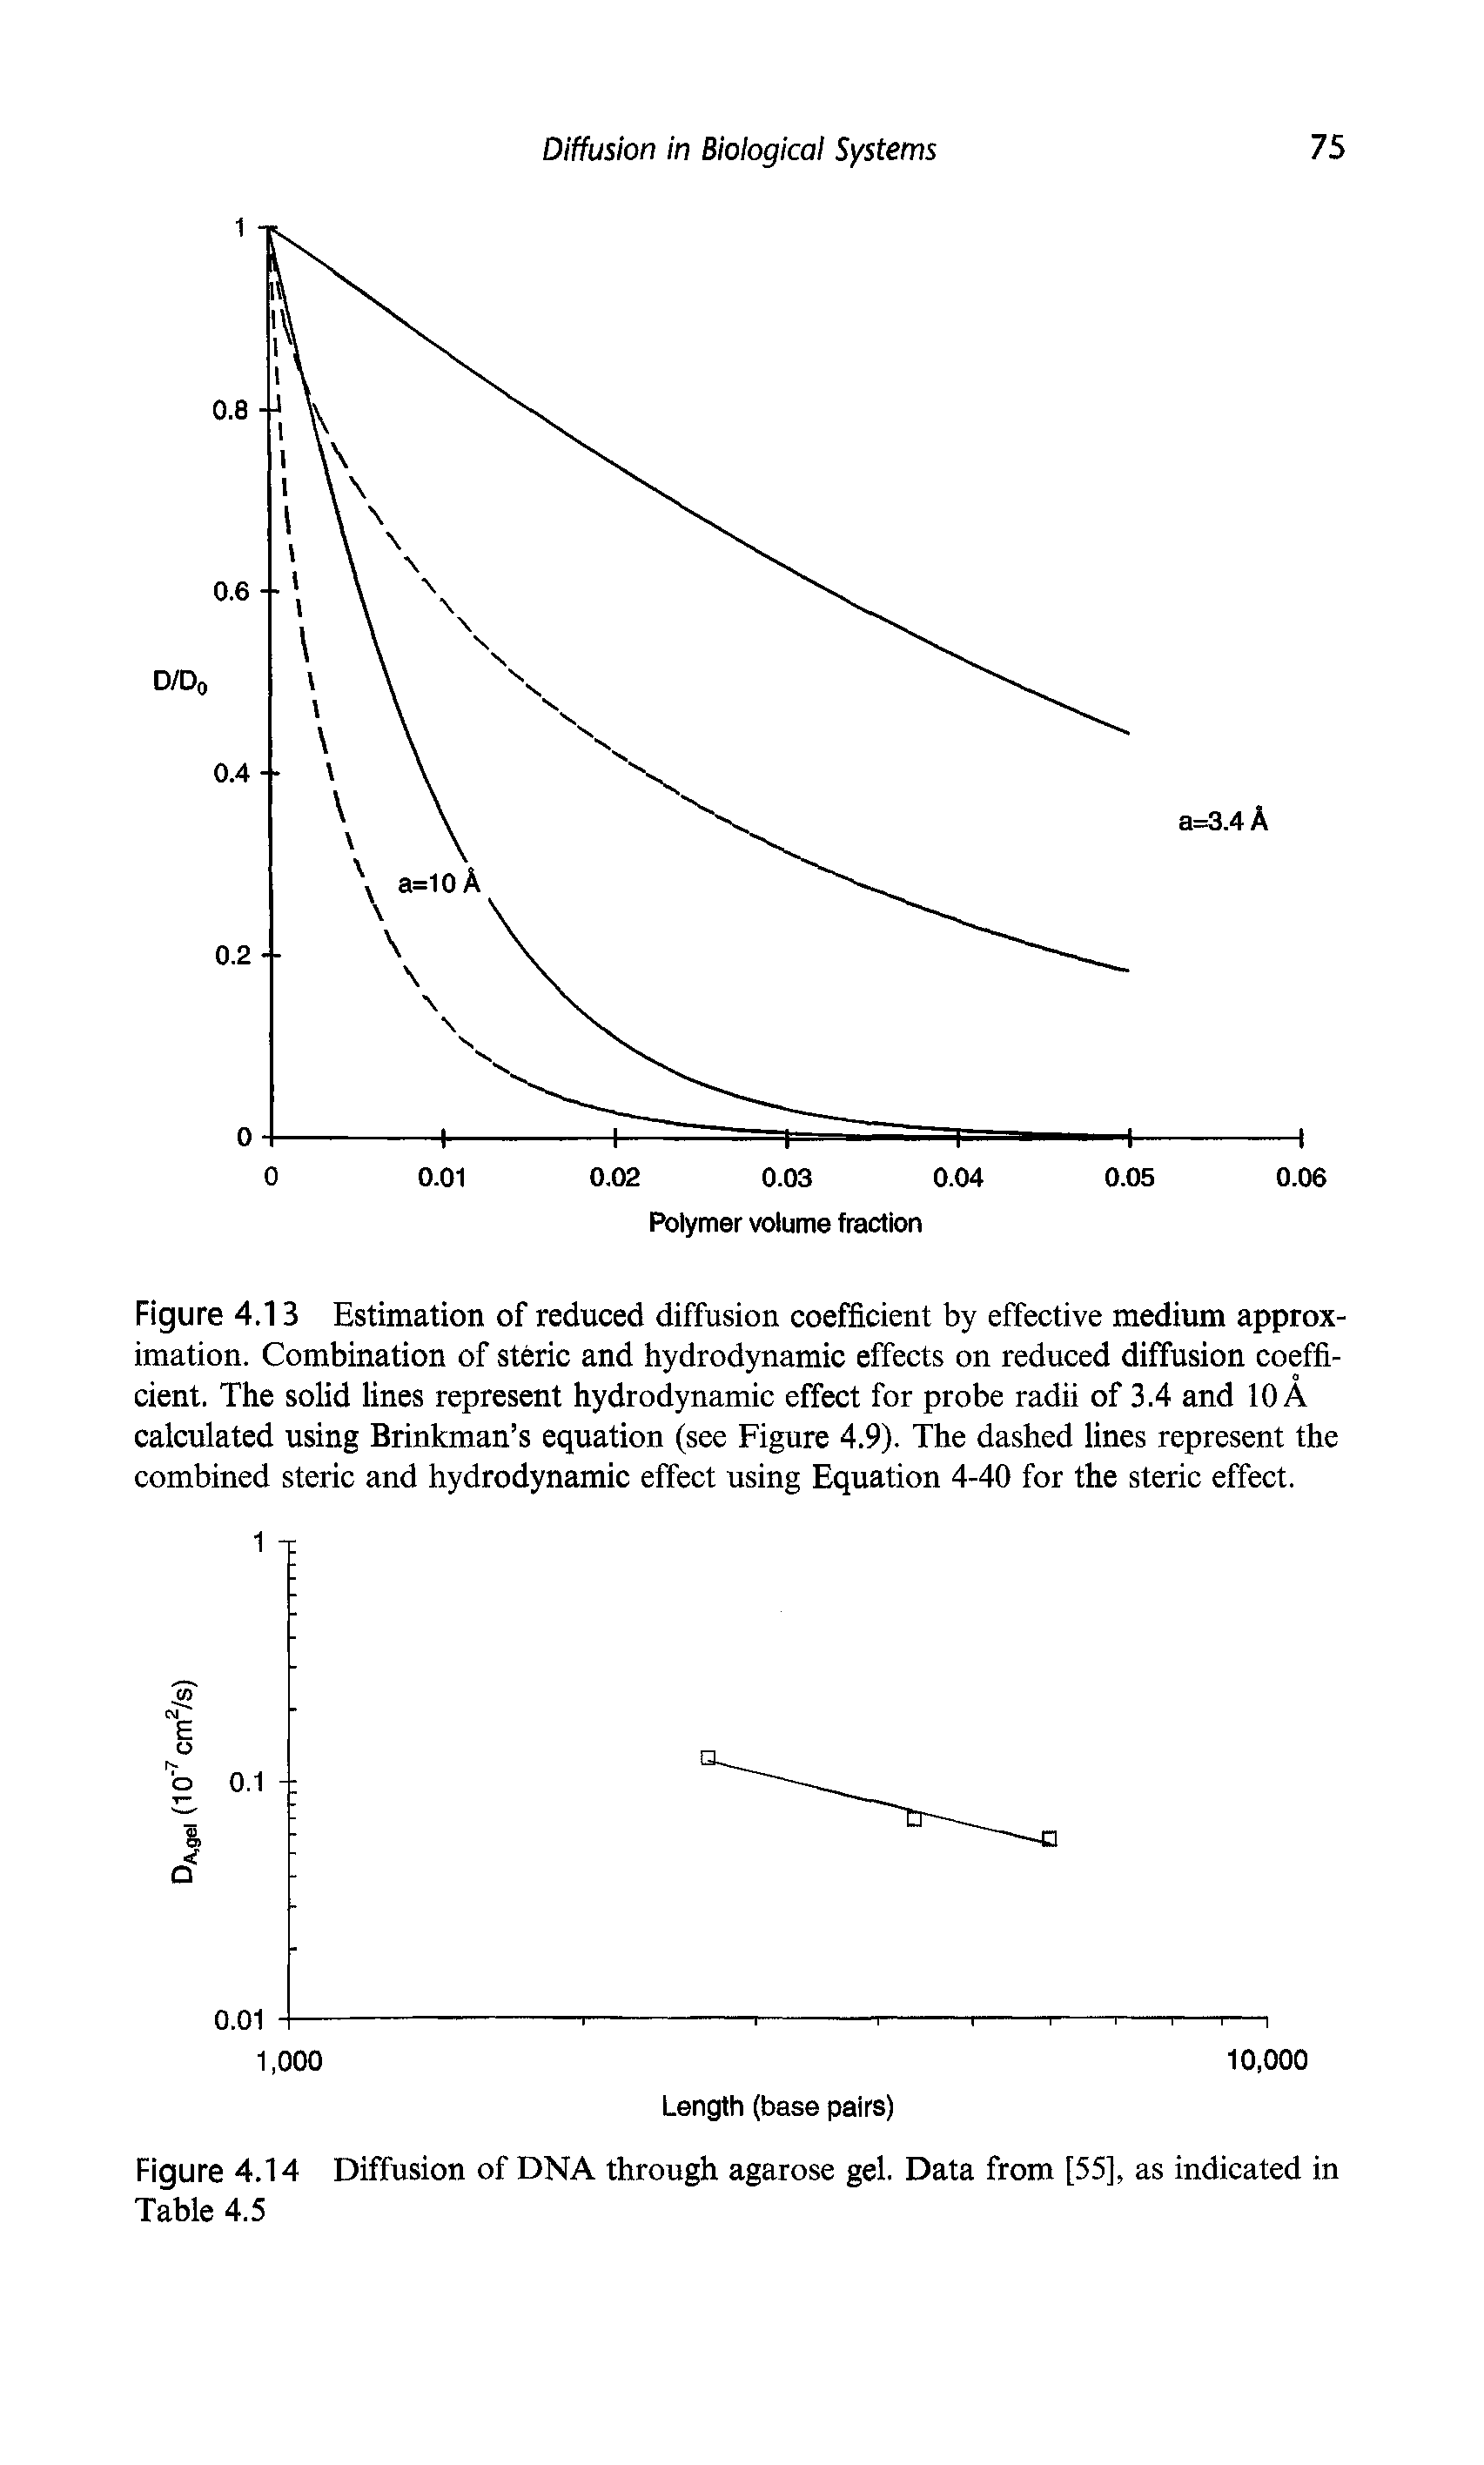 Figure 4.13 Estimation of reduced diffusion coefficient by effective medium approximation. Combination of steric and hydrodynamic effects on reduced diffusion coefficient. The solid lines represent hydrodynamic effect for probe radii of 3.4 and 10 A calculated using Brinkman s equation (see Figure 4.9). The dashed lines represent the combined steric and hydrodynamic effect using Equation 4-40 for the steric effect.